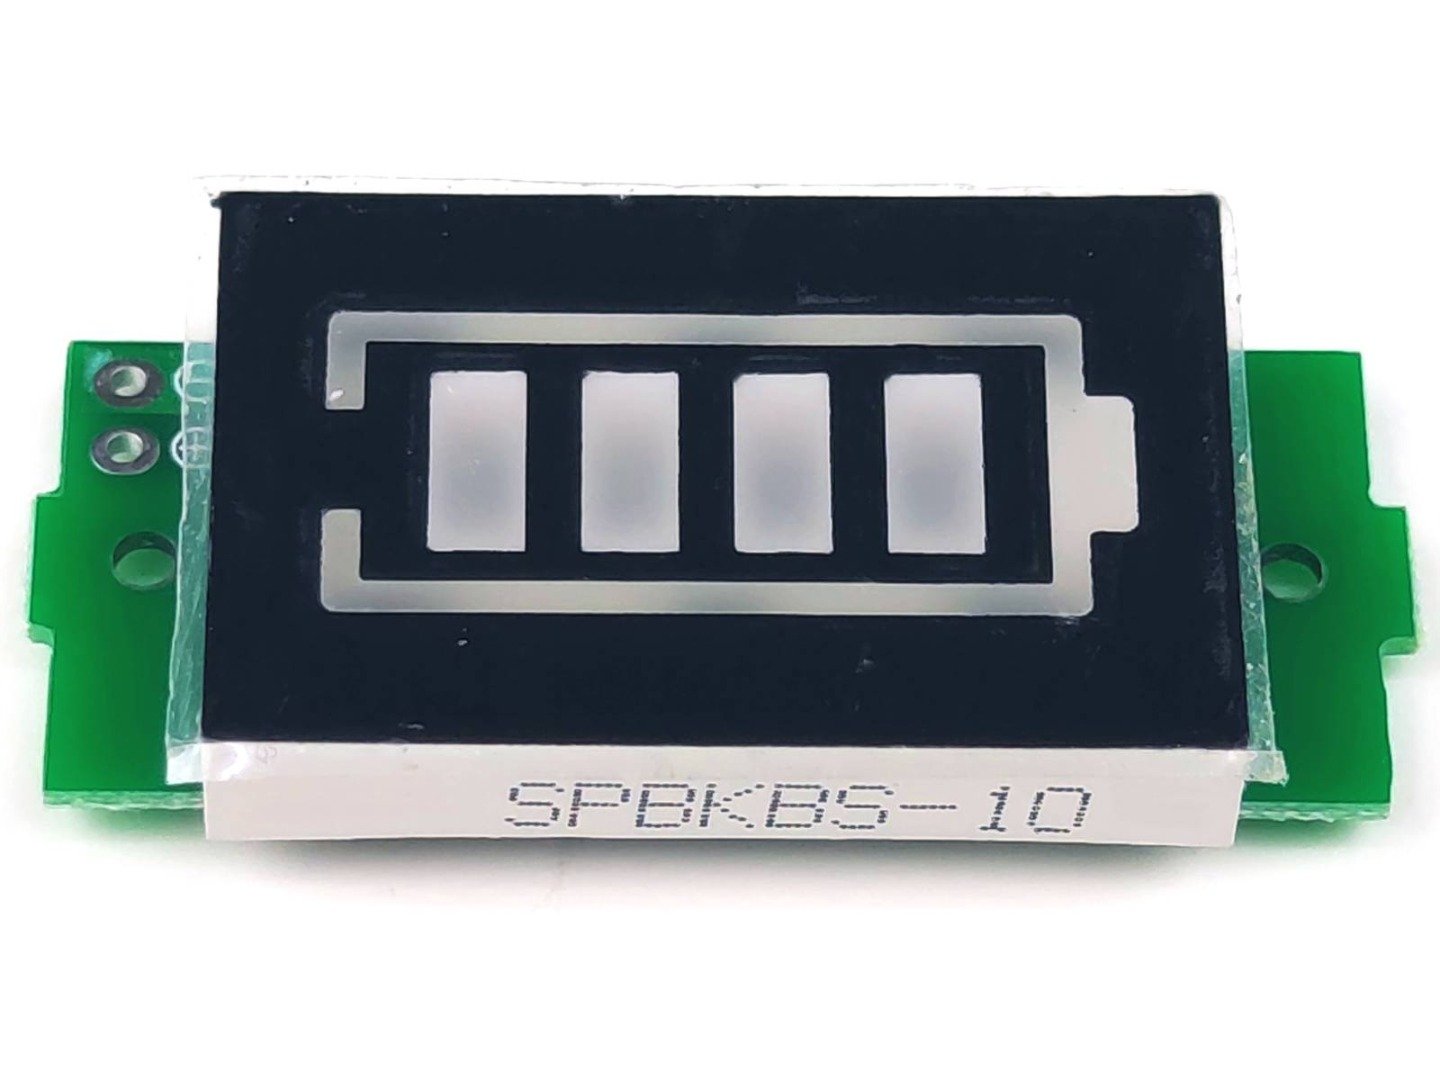 Lithium Battery Gauge LED for 1-8 cells in series – GREEN LED display 4